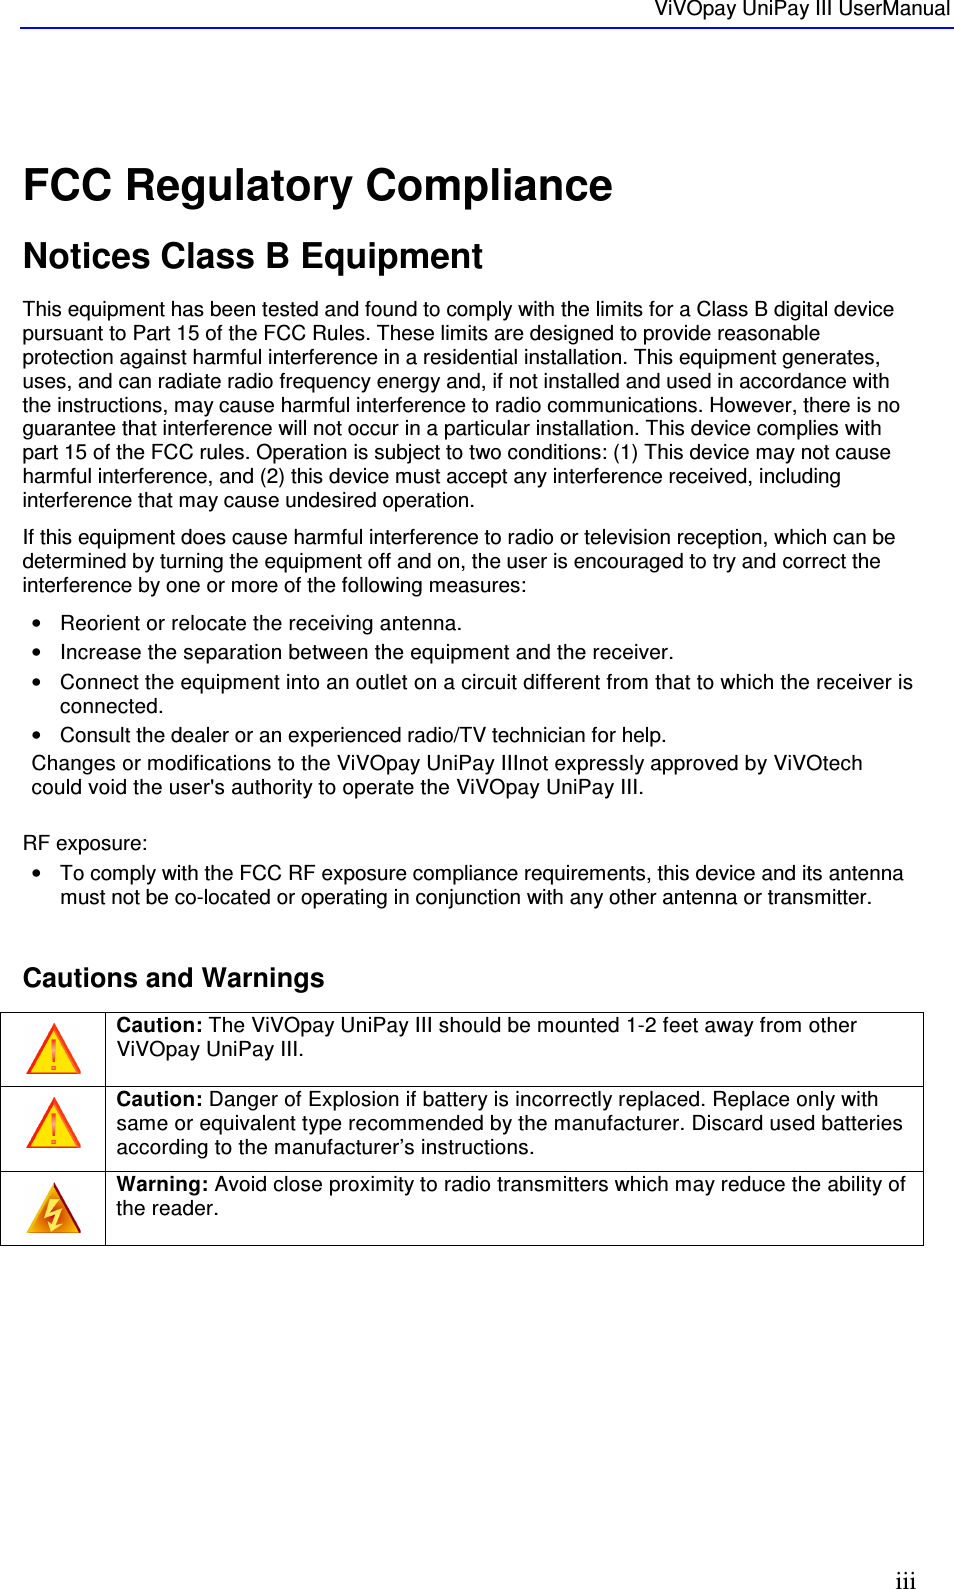   ViVOpay UniPay III UserManual     iii  FCC Regulatory Compliance Notices Class B Equipment This equipment has been tested and found to comply with the limits for a Class B digital device pursuant to Part 15 of the FCC Rules. These limits are designed to provide reasonable protection against harmful interference in a residential installation. This equipment generates, uses, and can radiate radio frequency energy and, if not installed and used in accordance with the instructions, may cause harmful interference to radio communications. However, there is no guarantee that interference will not occur in a particular installation. This device complies with part 15 of the FCC rules. Operation is subject to two conditions: (1) This device may not cause harmful interference, and (2) this device must accept any interference received, including interference that may cause undesired operation. If this equipment does cause harmful interference to radio or television reception, which can be determined by turning the equipment off and on, the user is encouraged to try and correct the interference by one or more of the following measures: •  Reorient or relocate the receiving antenna.  •  Increase the separation between the equipment and the receiver. •  Connect the equipment into an outlet on a circuit different from that to which the receiver is connected.  •  Consult the dealer or an experienced radio/TV technician for help.  Changes or modifications to the ViVOpay UniPay IIInot expressly approved by ViVOtech could void the user&apos;s authority to operate the ViVOpay UniPay III.  RF exposure: •  To comply with the FCC RF exposure compliance requirements, this device and its antenna must not be co-located or operating in conjunction with any other antenna or transmitter.  Cautions and Warnings  Caution: The ViVOpay UniPay III should be mounted 1-2 feet away from other ViVOpay UniPay III.   Caution: Danger of Explosion if battery is incorrectly replaced. Replace only with same or equivalent type recommended by the manufacturer. Discard used batteries according to the manufacturer’s instructions.  Warning: Avoid close proximity to radio transmitters which may reduce the ability of the reader.     